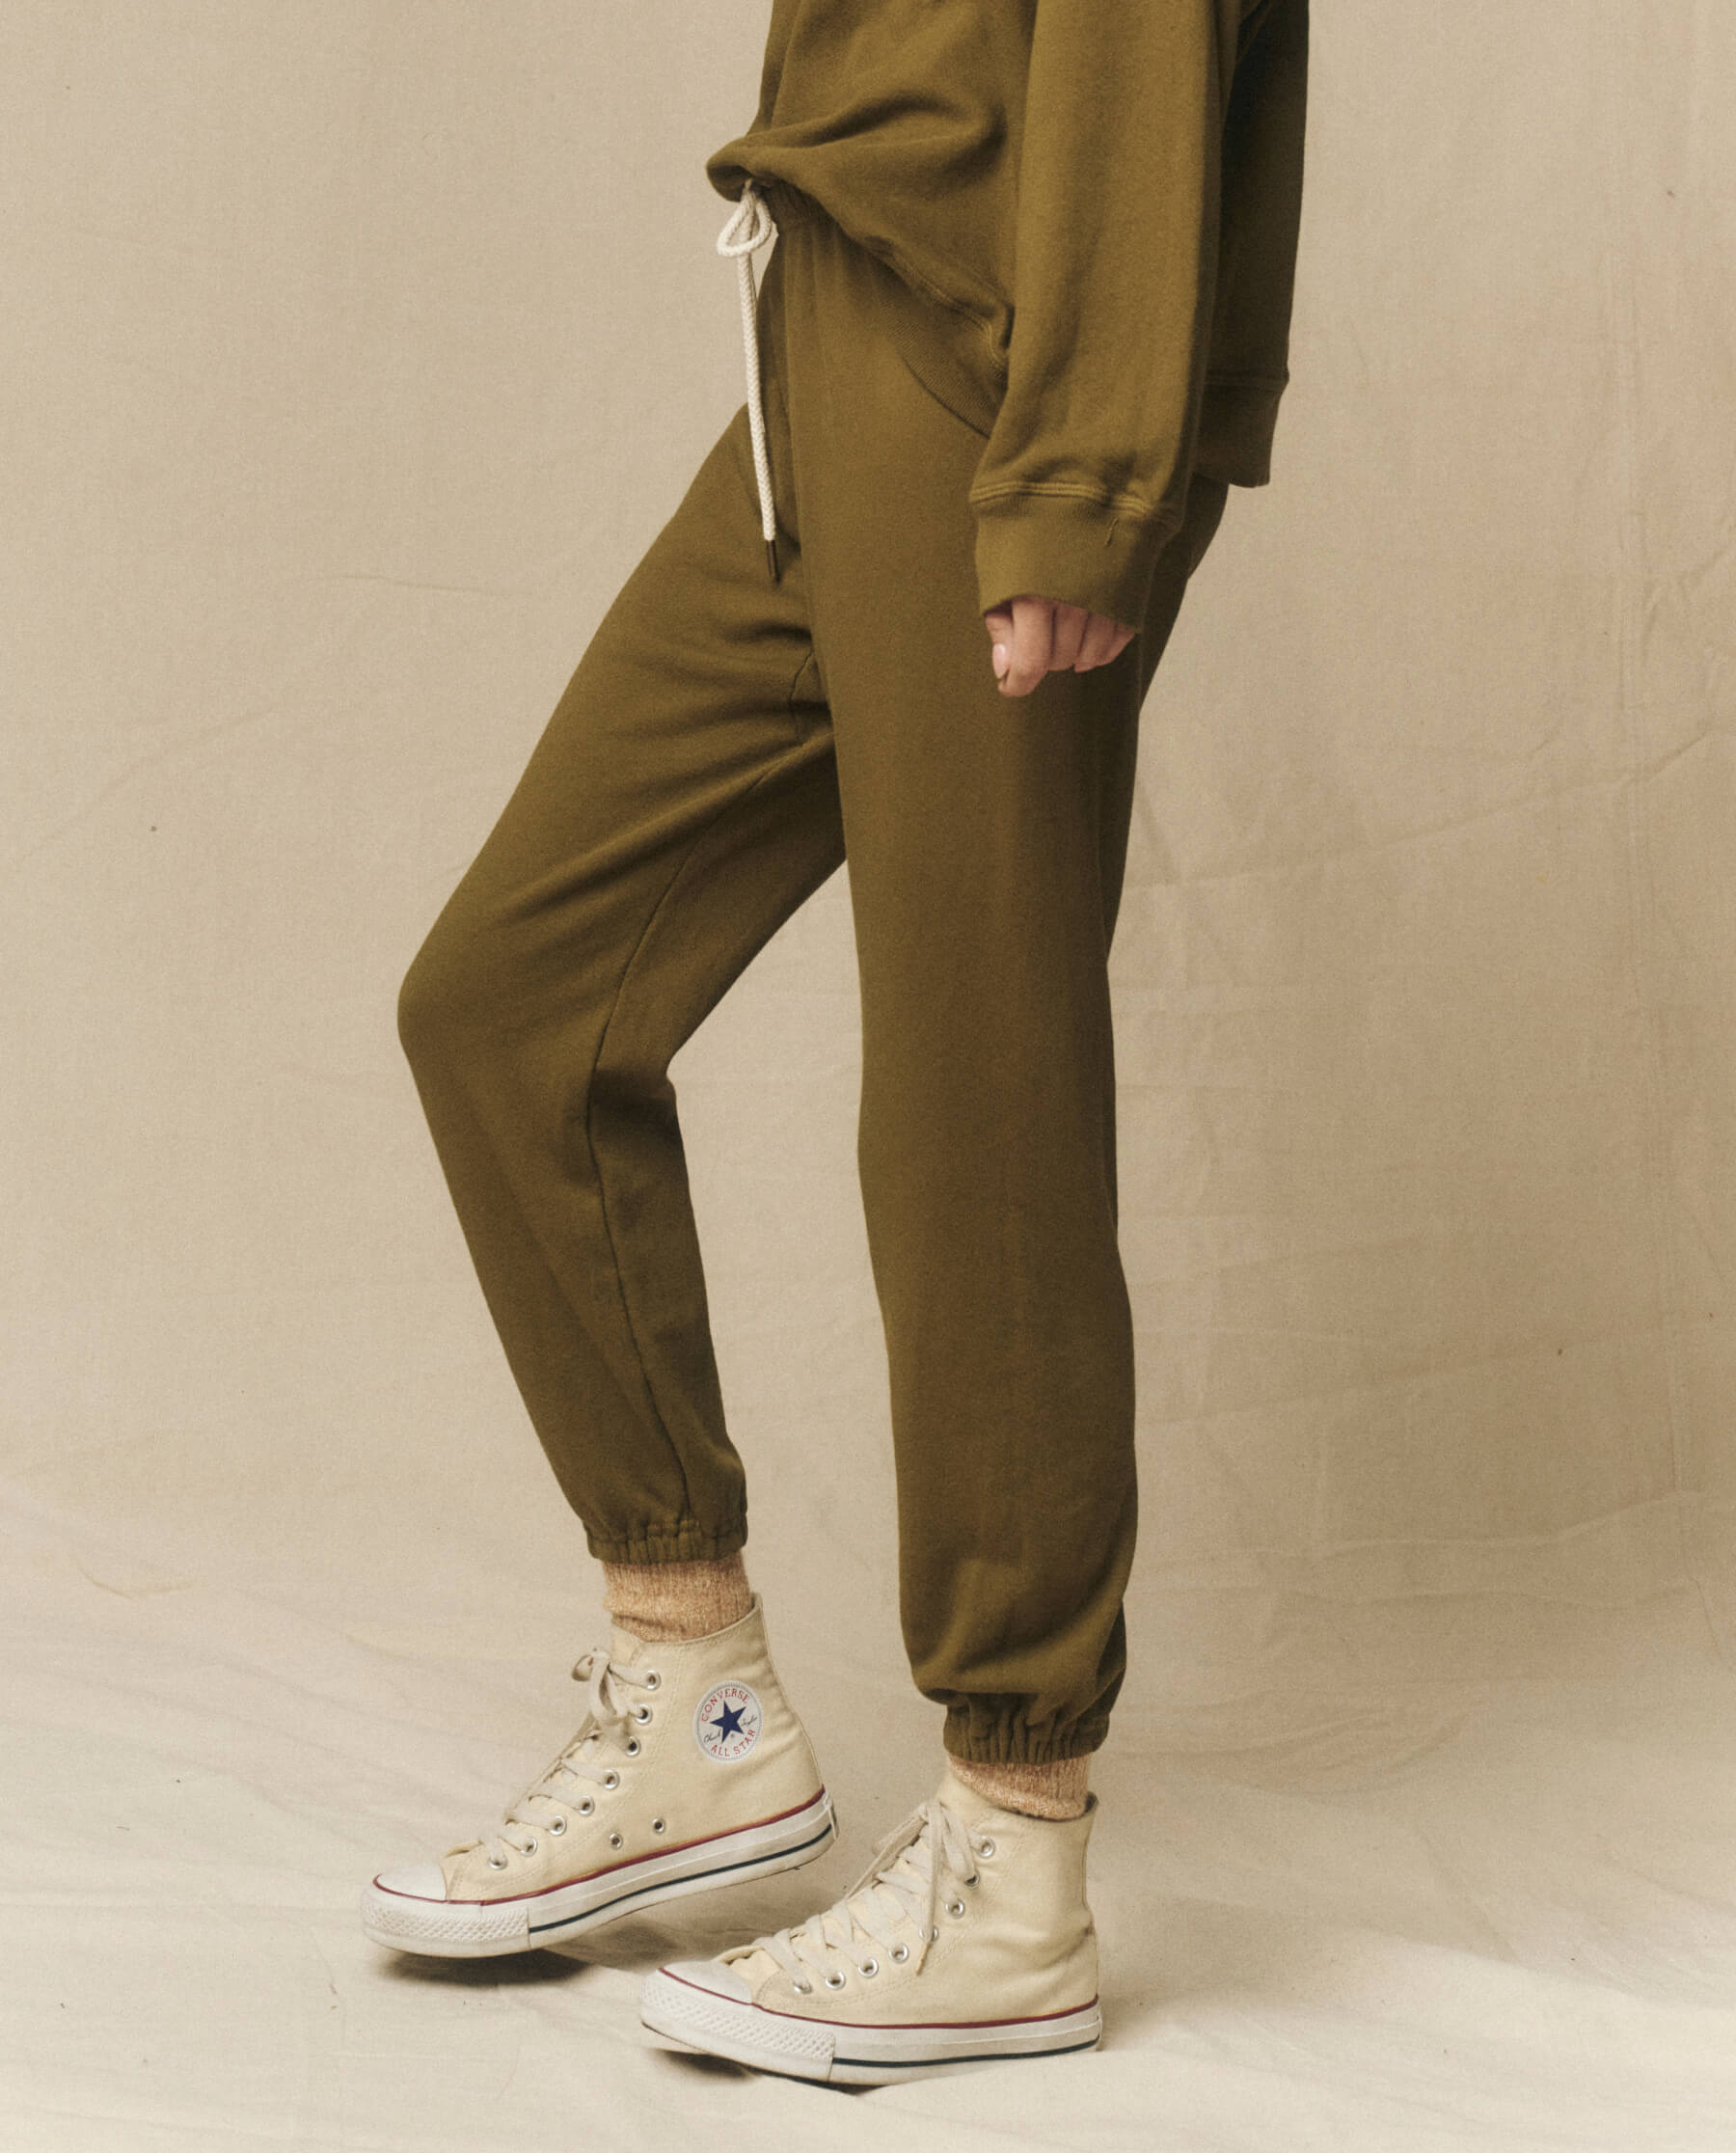 The Stadium Sweatpant. Solid -- Fir Green SWEATPANTS THE GREAT. FALL 23 KNITS